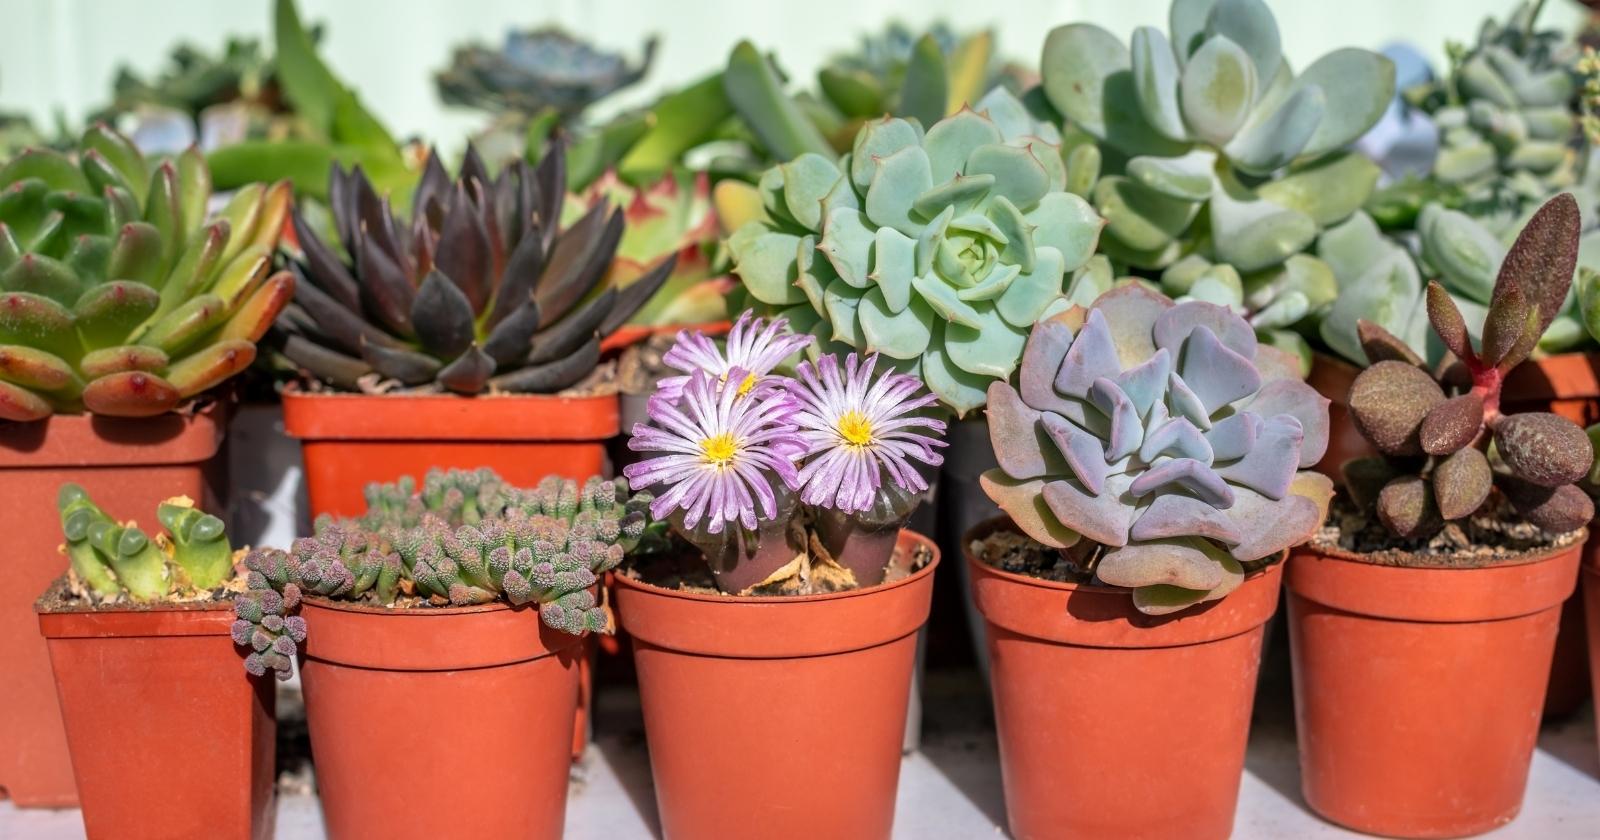 47 Different Types of Succulent Plants With Names and Pictures